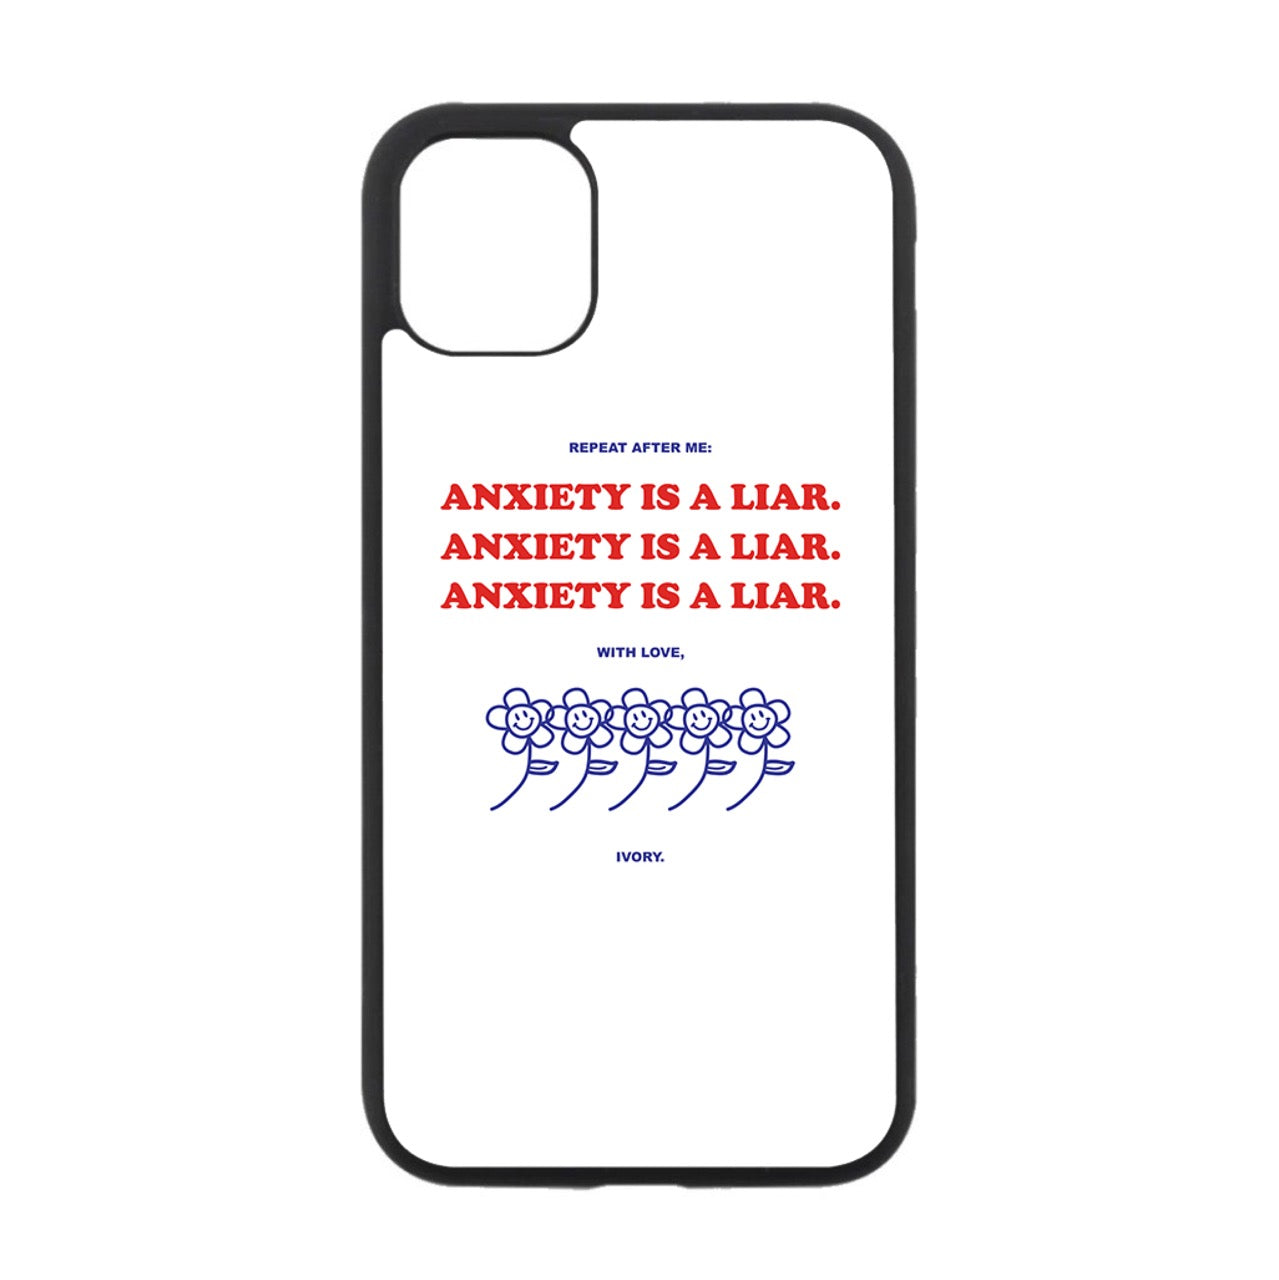 ANXIETY IS A LIAR IPHONE CASE